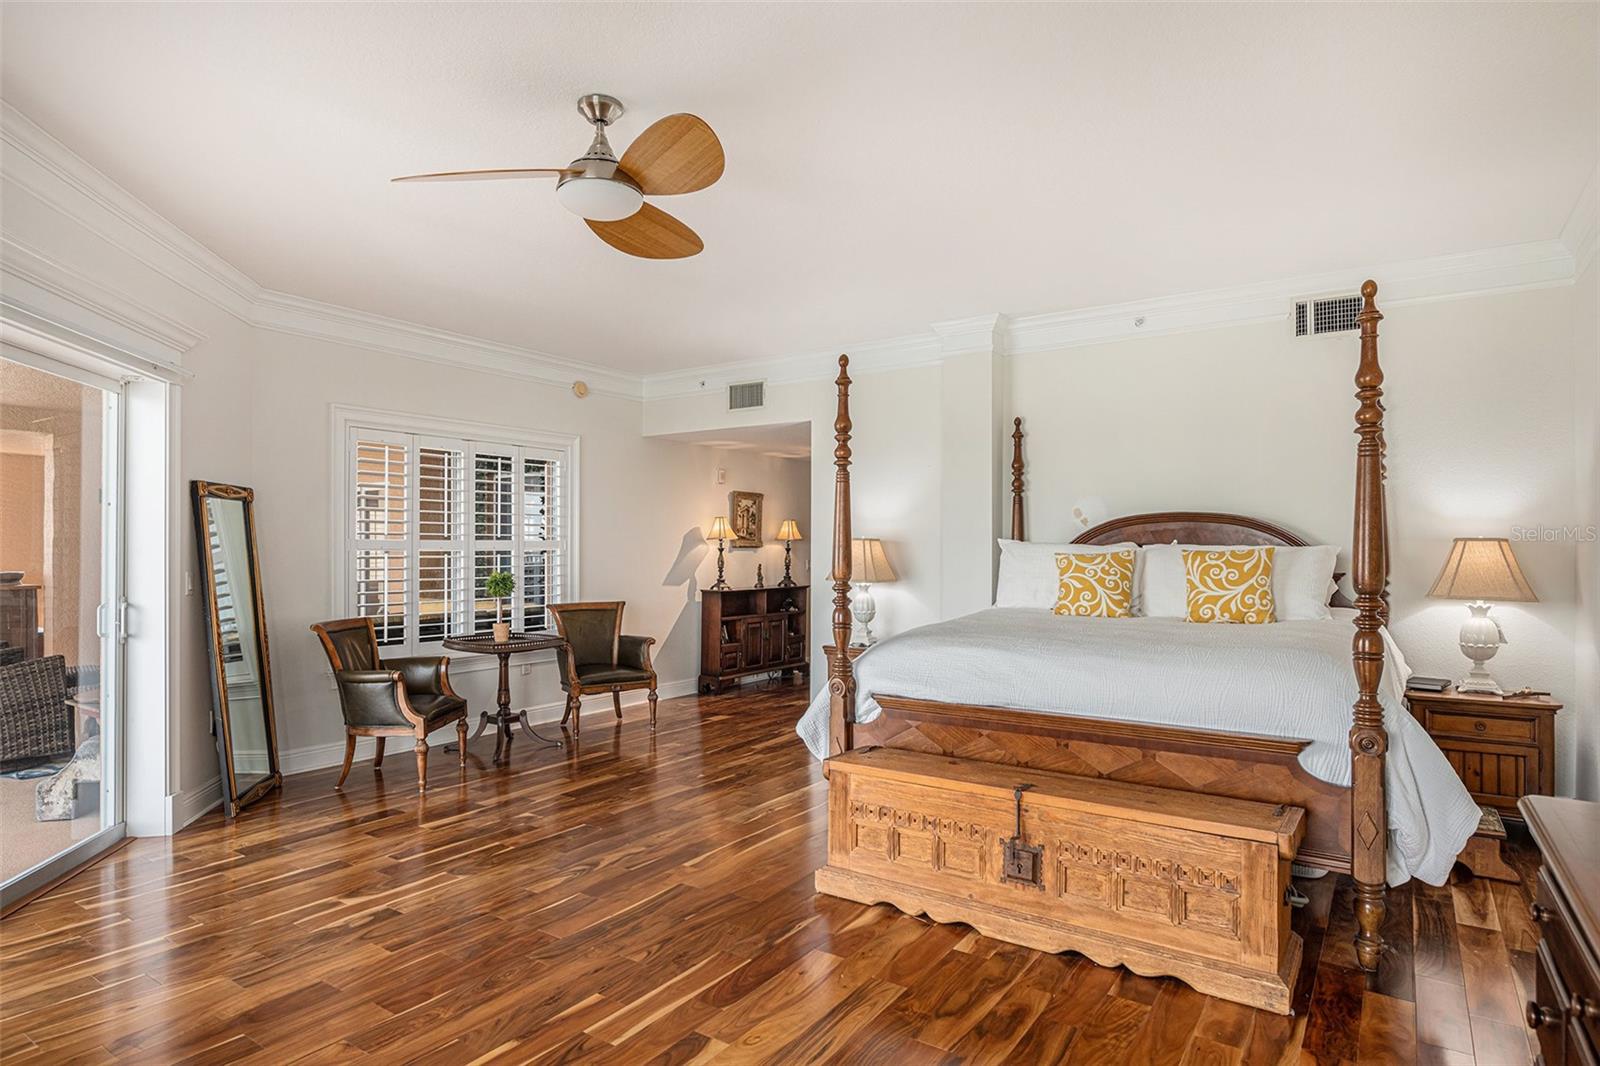 Stunning wood floors, plantation shutters, and crown molding accent the beauty of this primary bedroom.